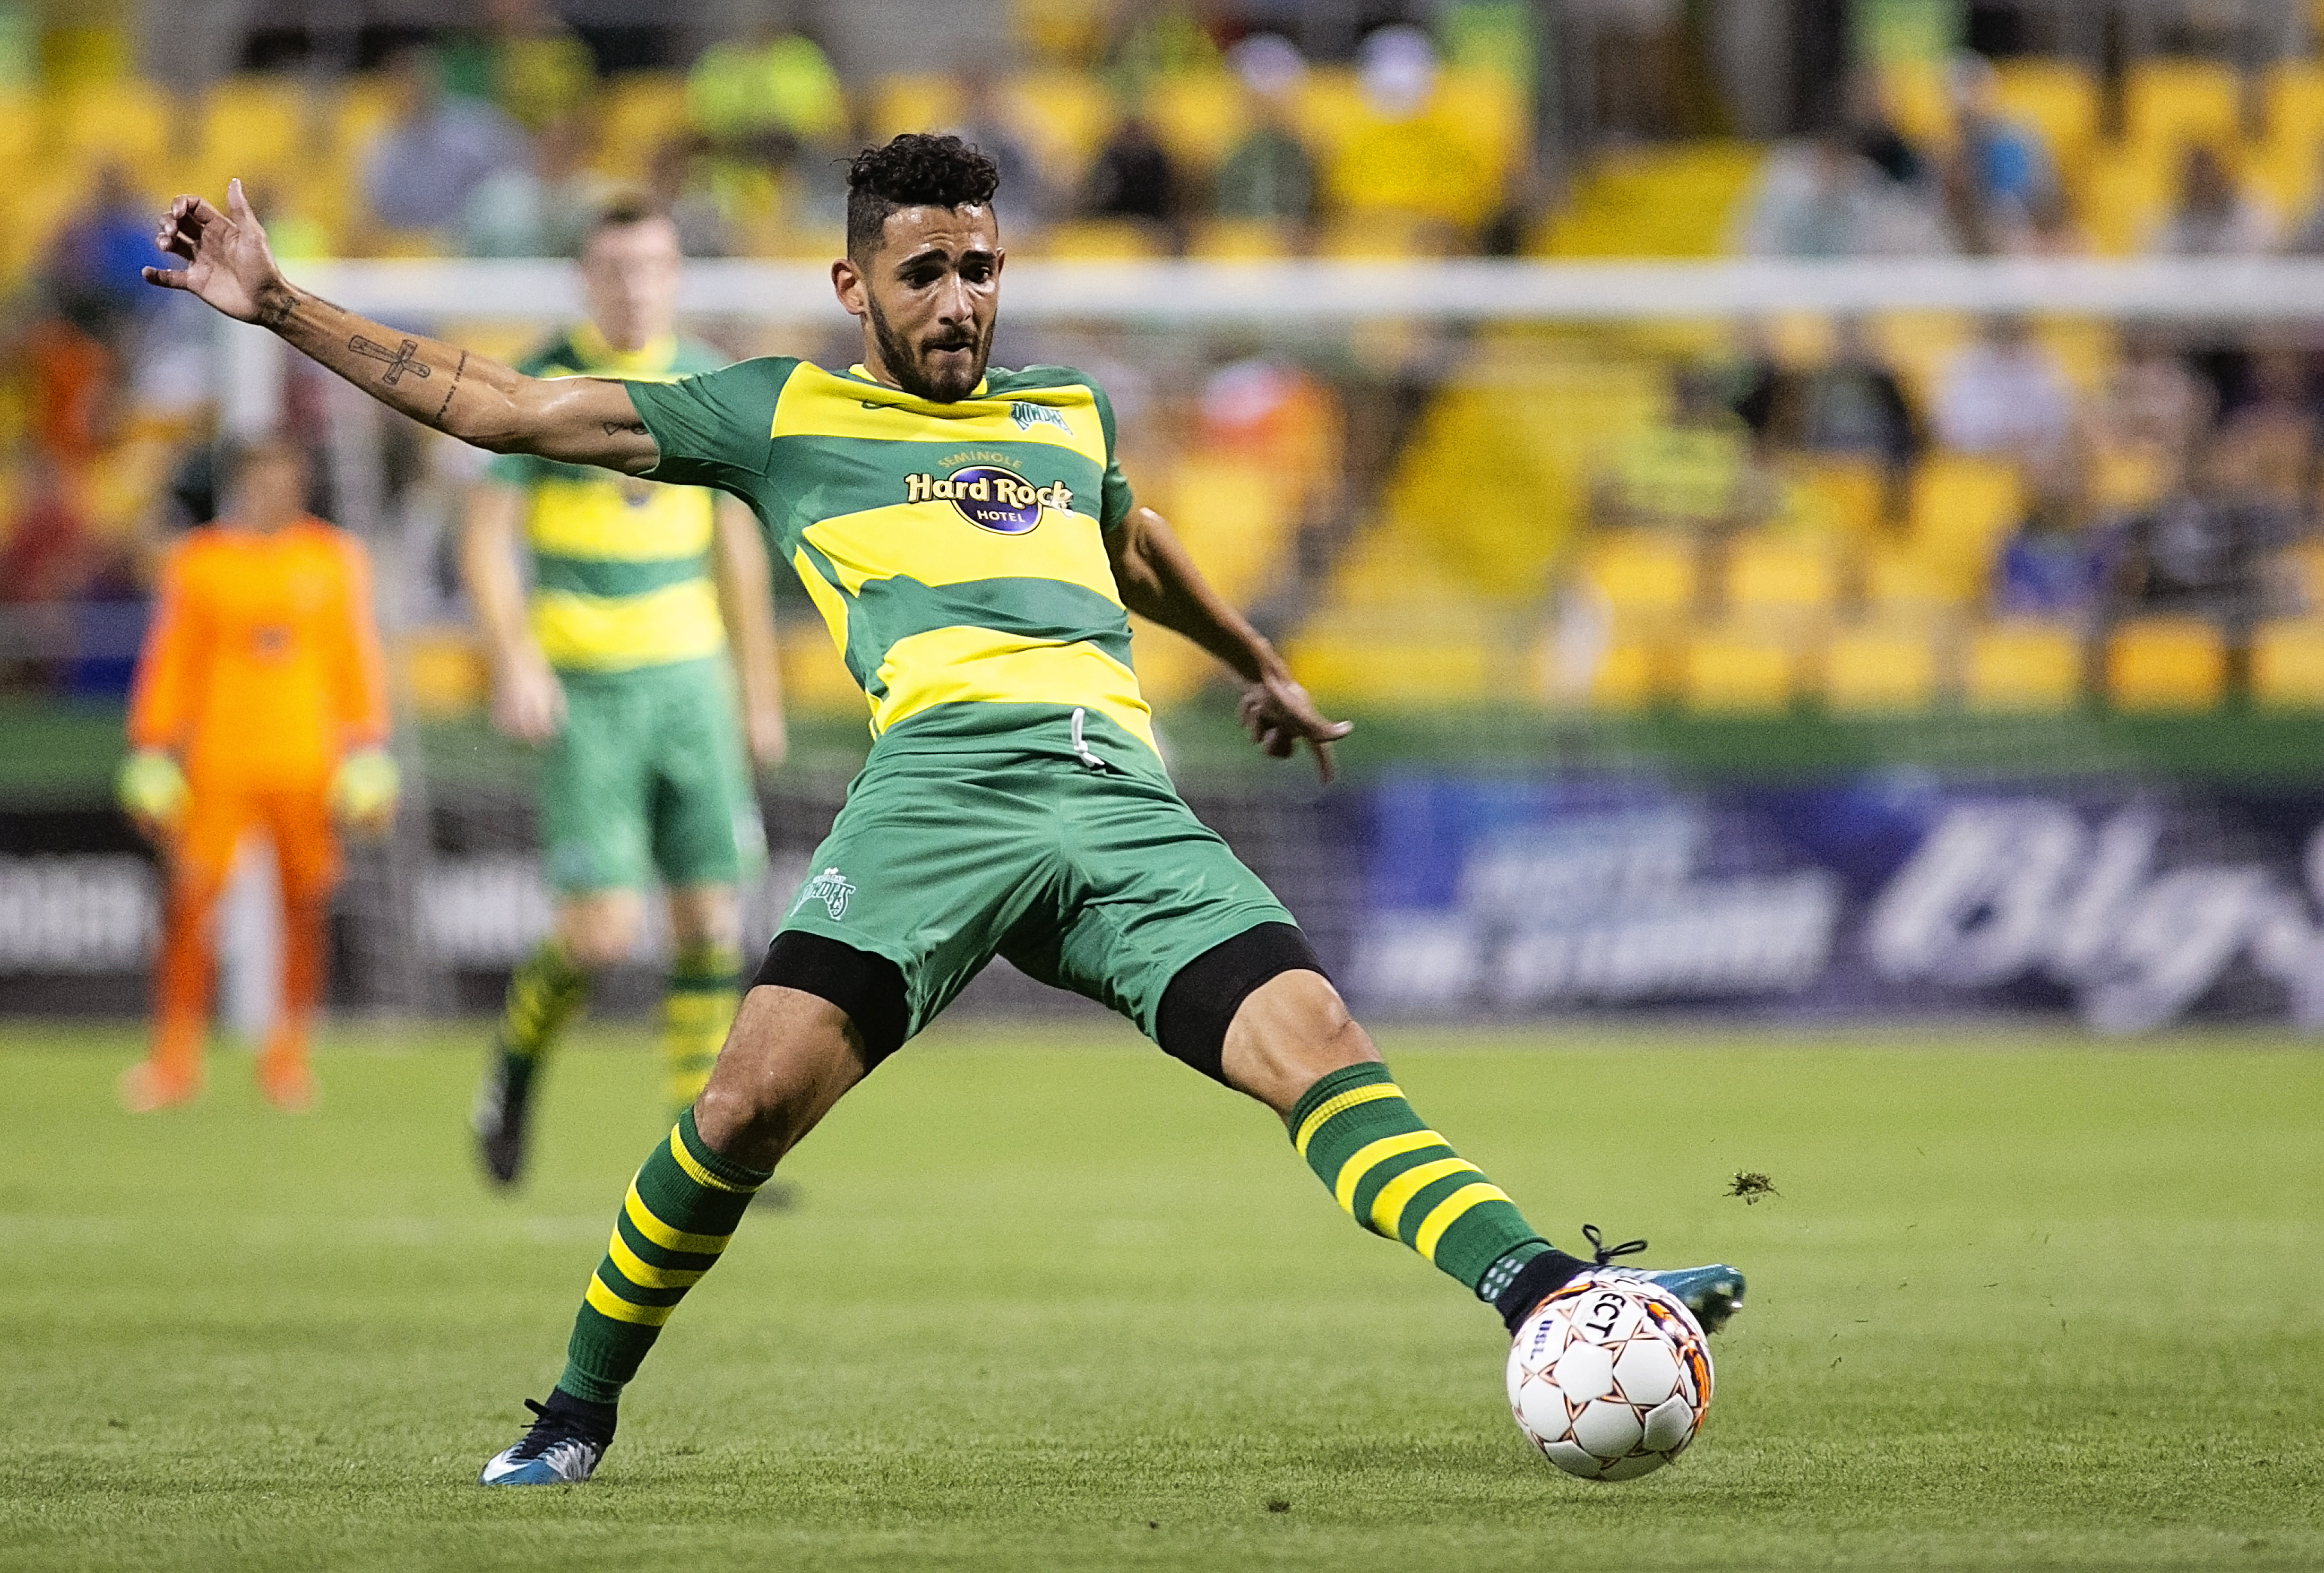 Fernandes scored two goals to lead the Rowdies./CARMEN MANDATO